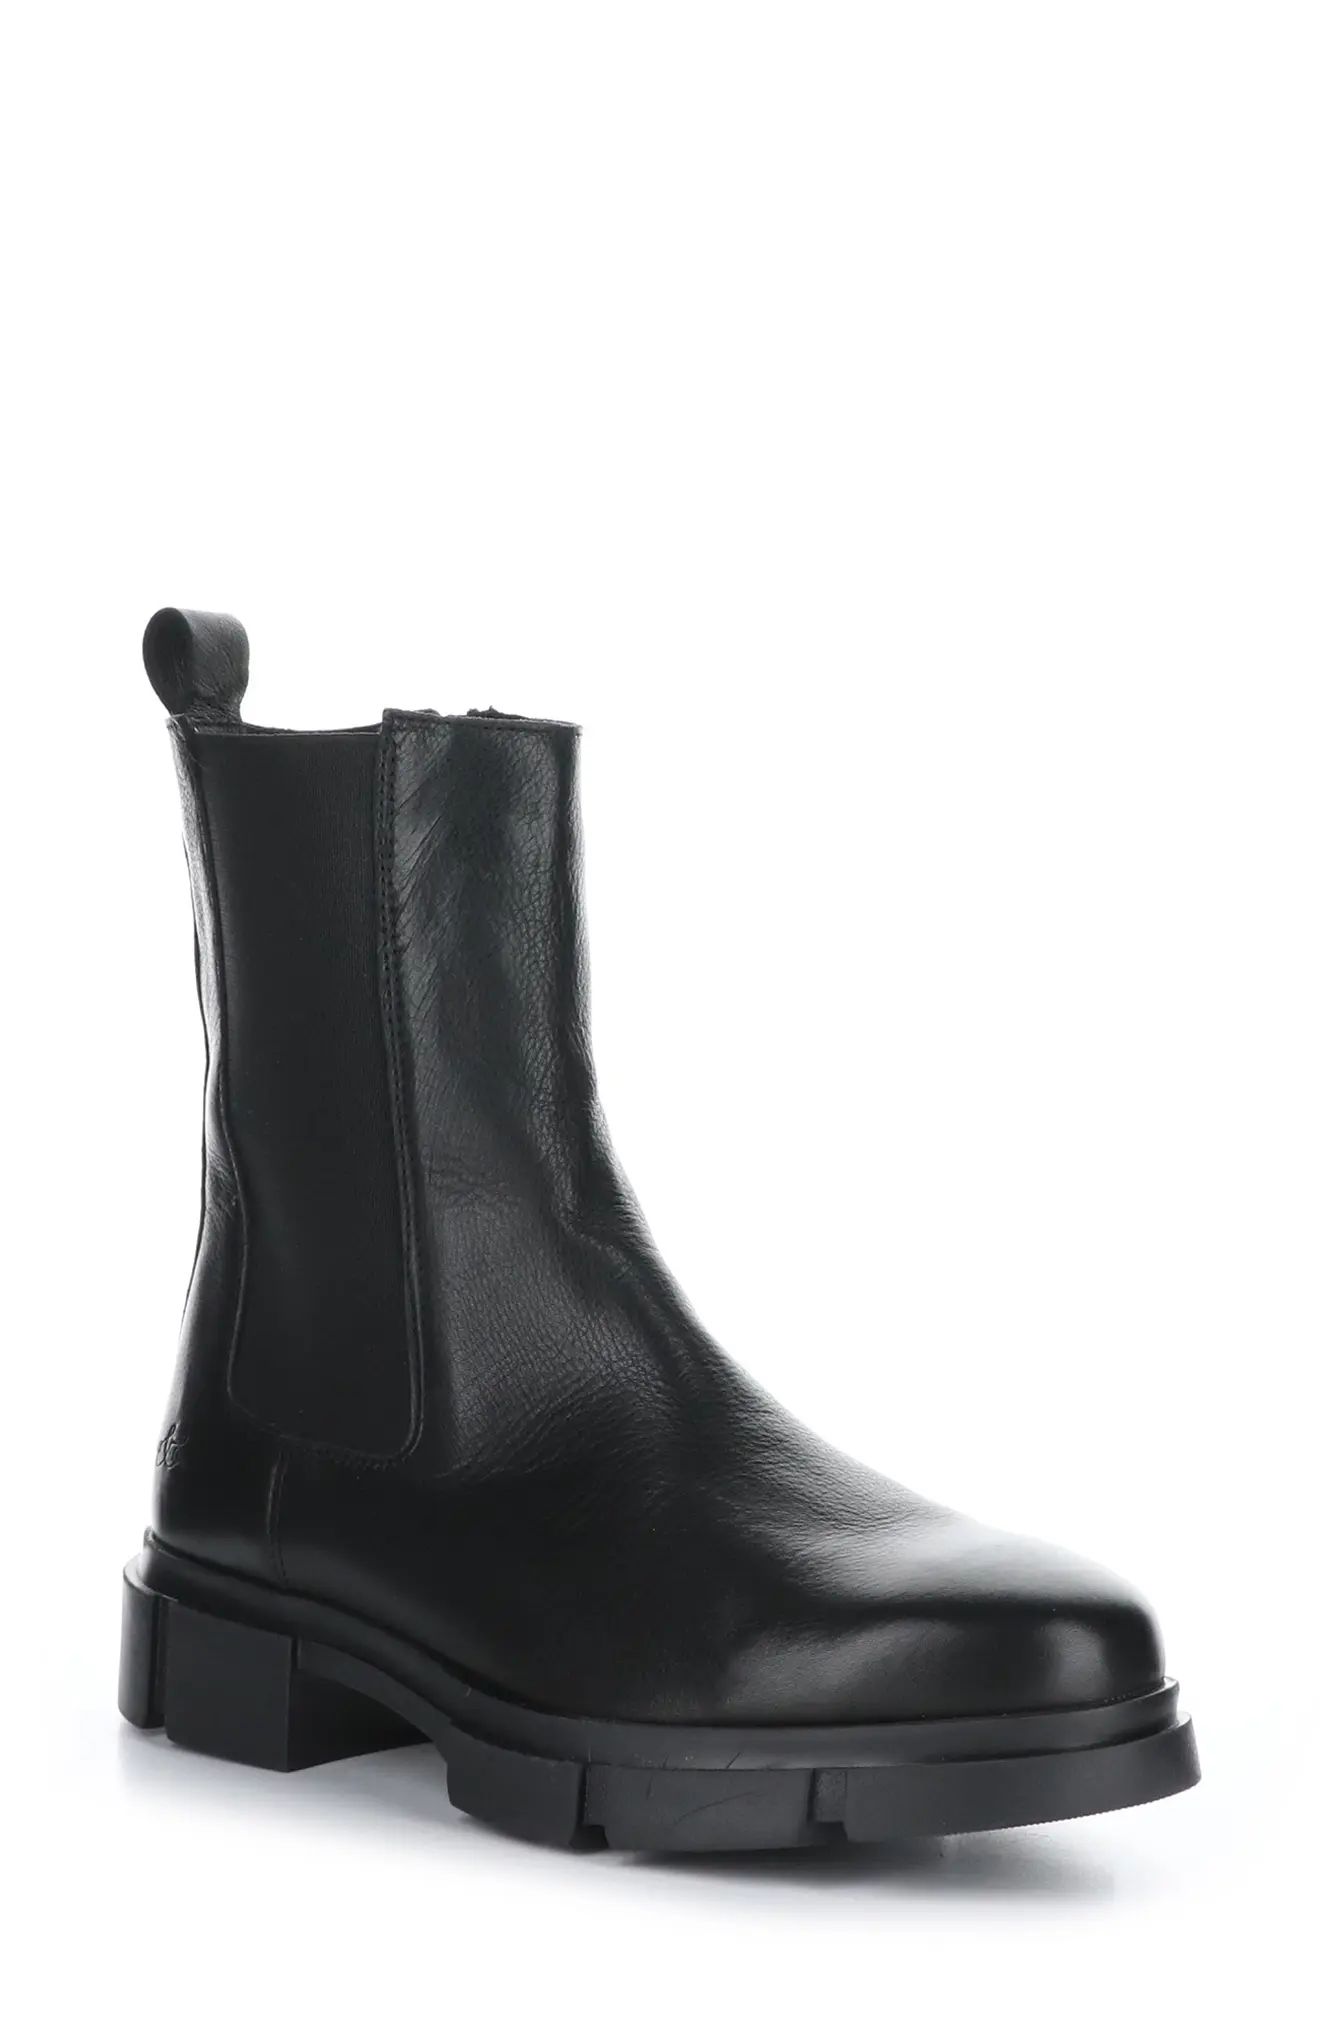 Bos. & Co. Lock Waterproof Chelsea Boot, Size 7-7.5Us in Black Feel Leather at Nordstrom | Nordstrom